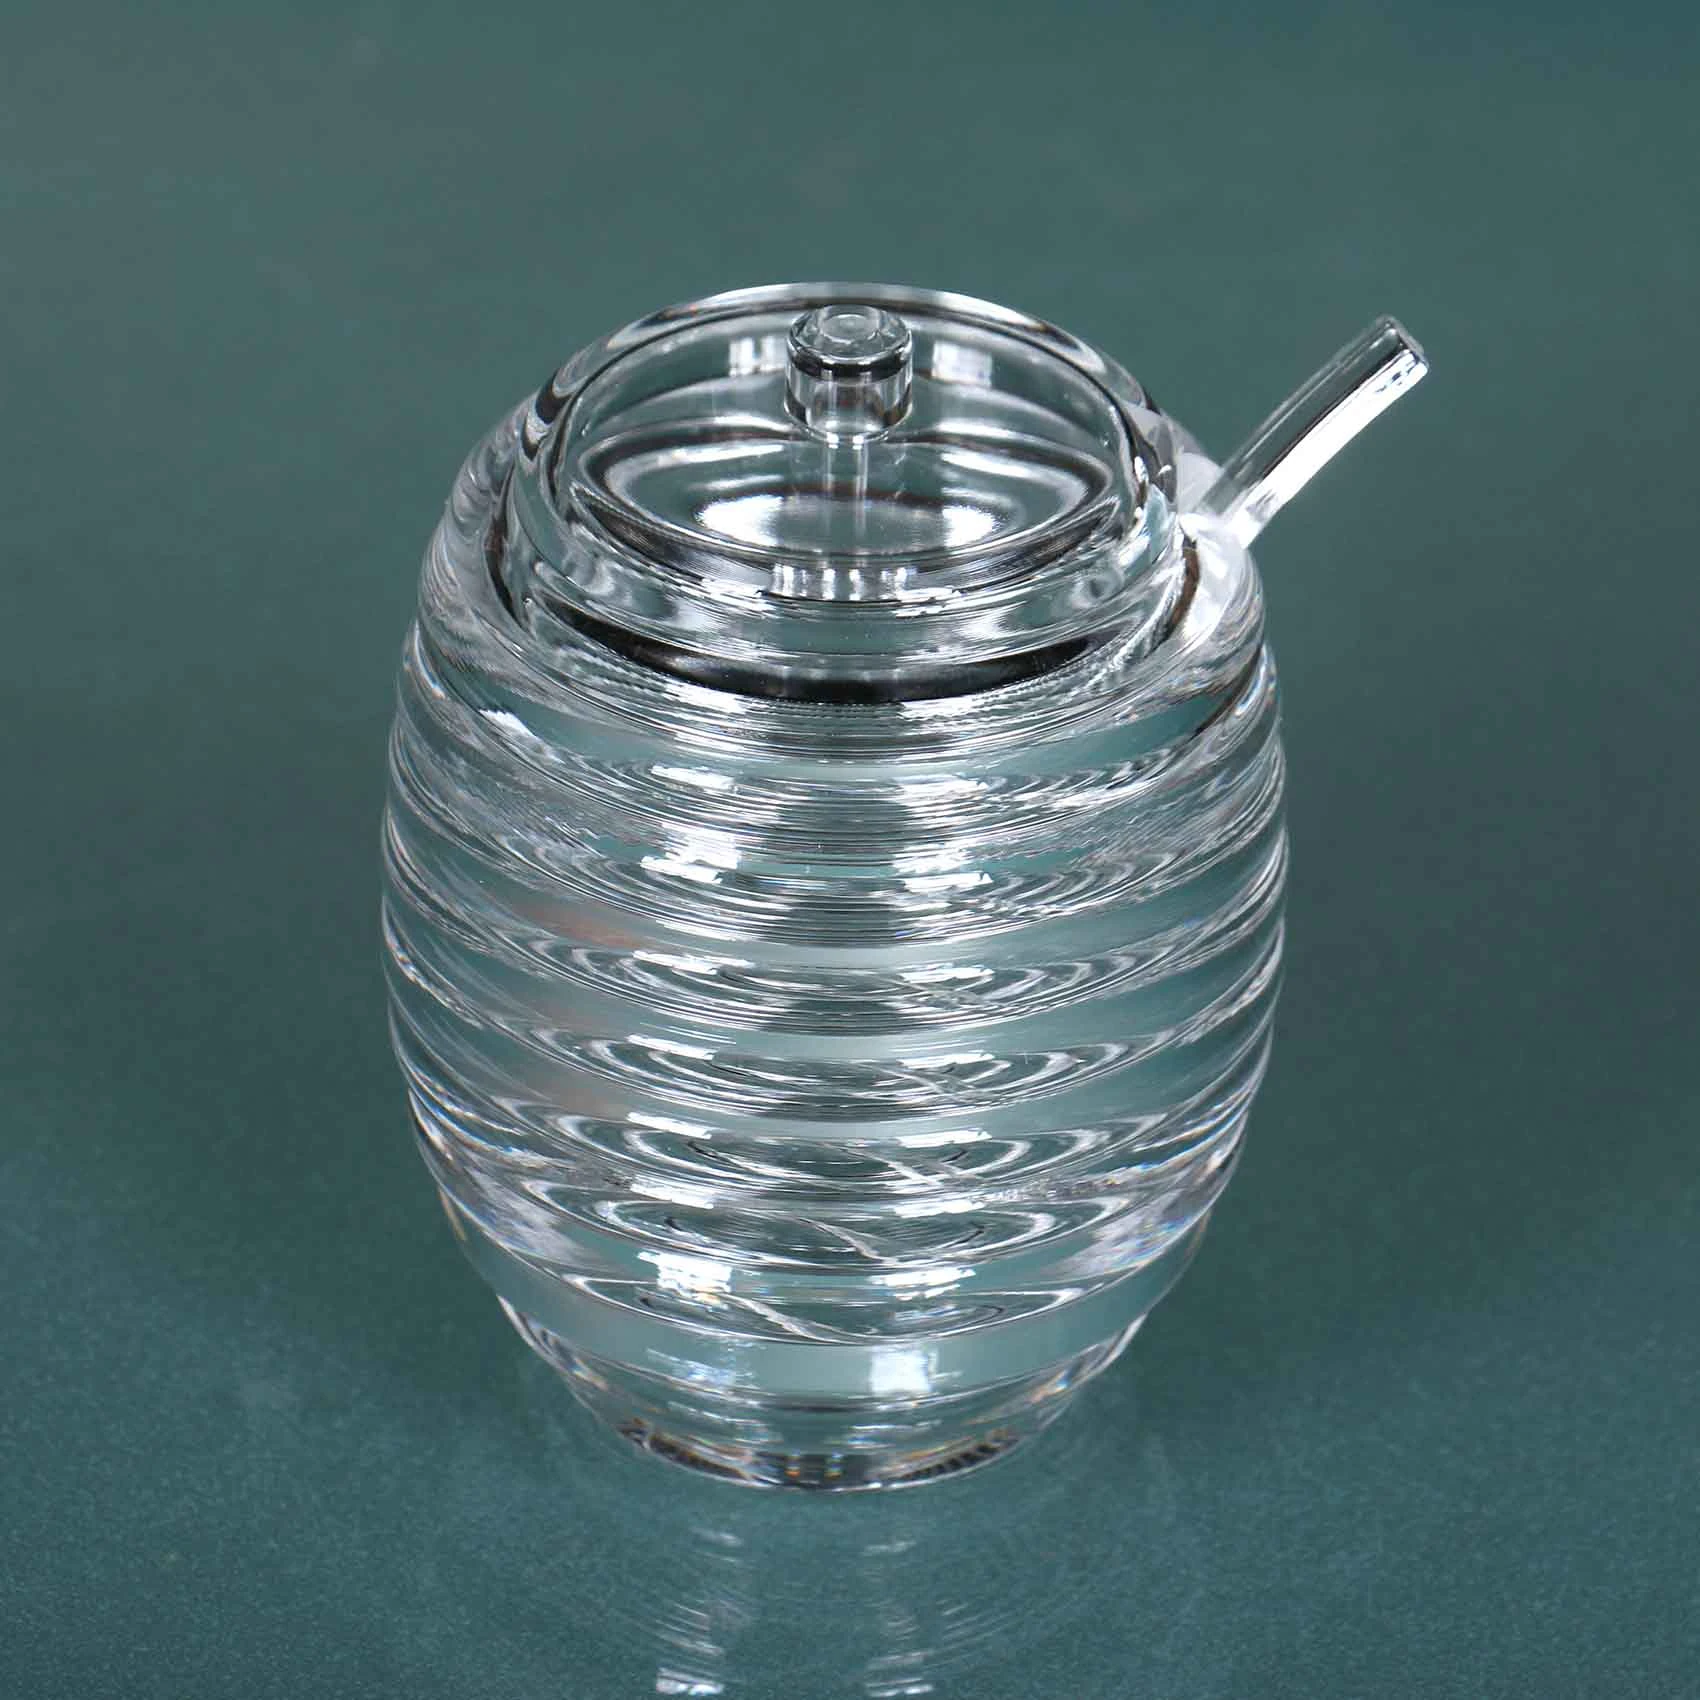 GTT HIGH QUALITY HONEYCOMP SUGER POT WITH SPOON AND LID |TABLE WARE ACRYLIC MADE IN TAIWAN  CO-306